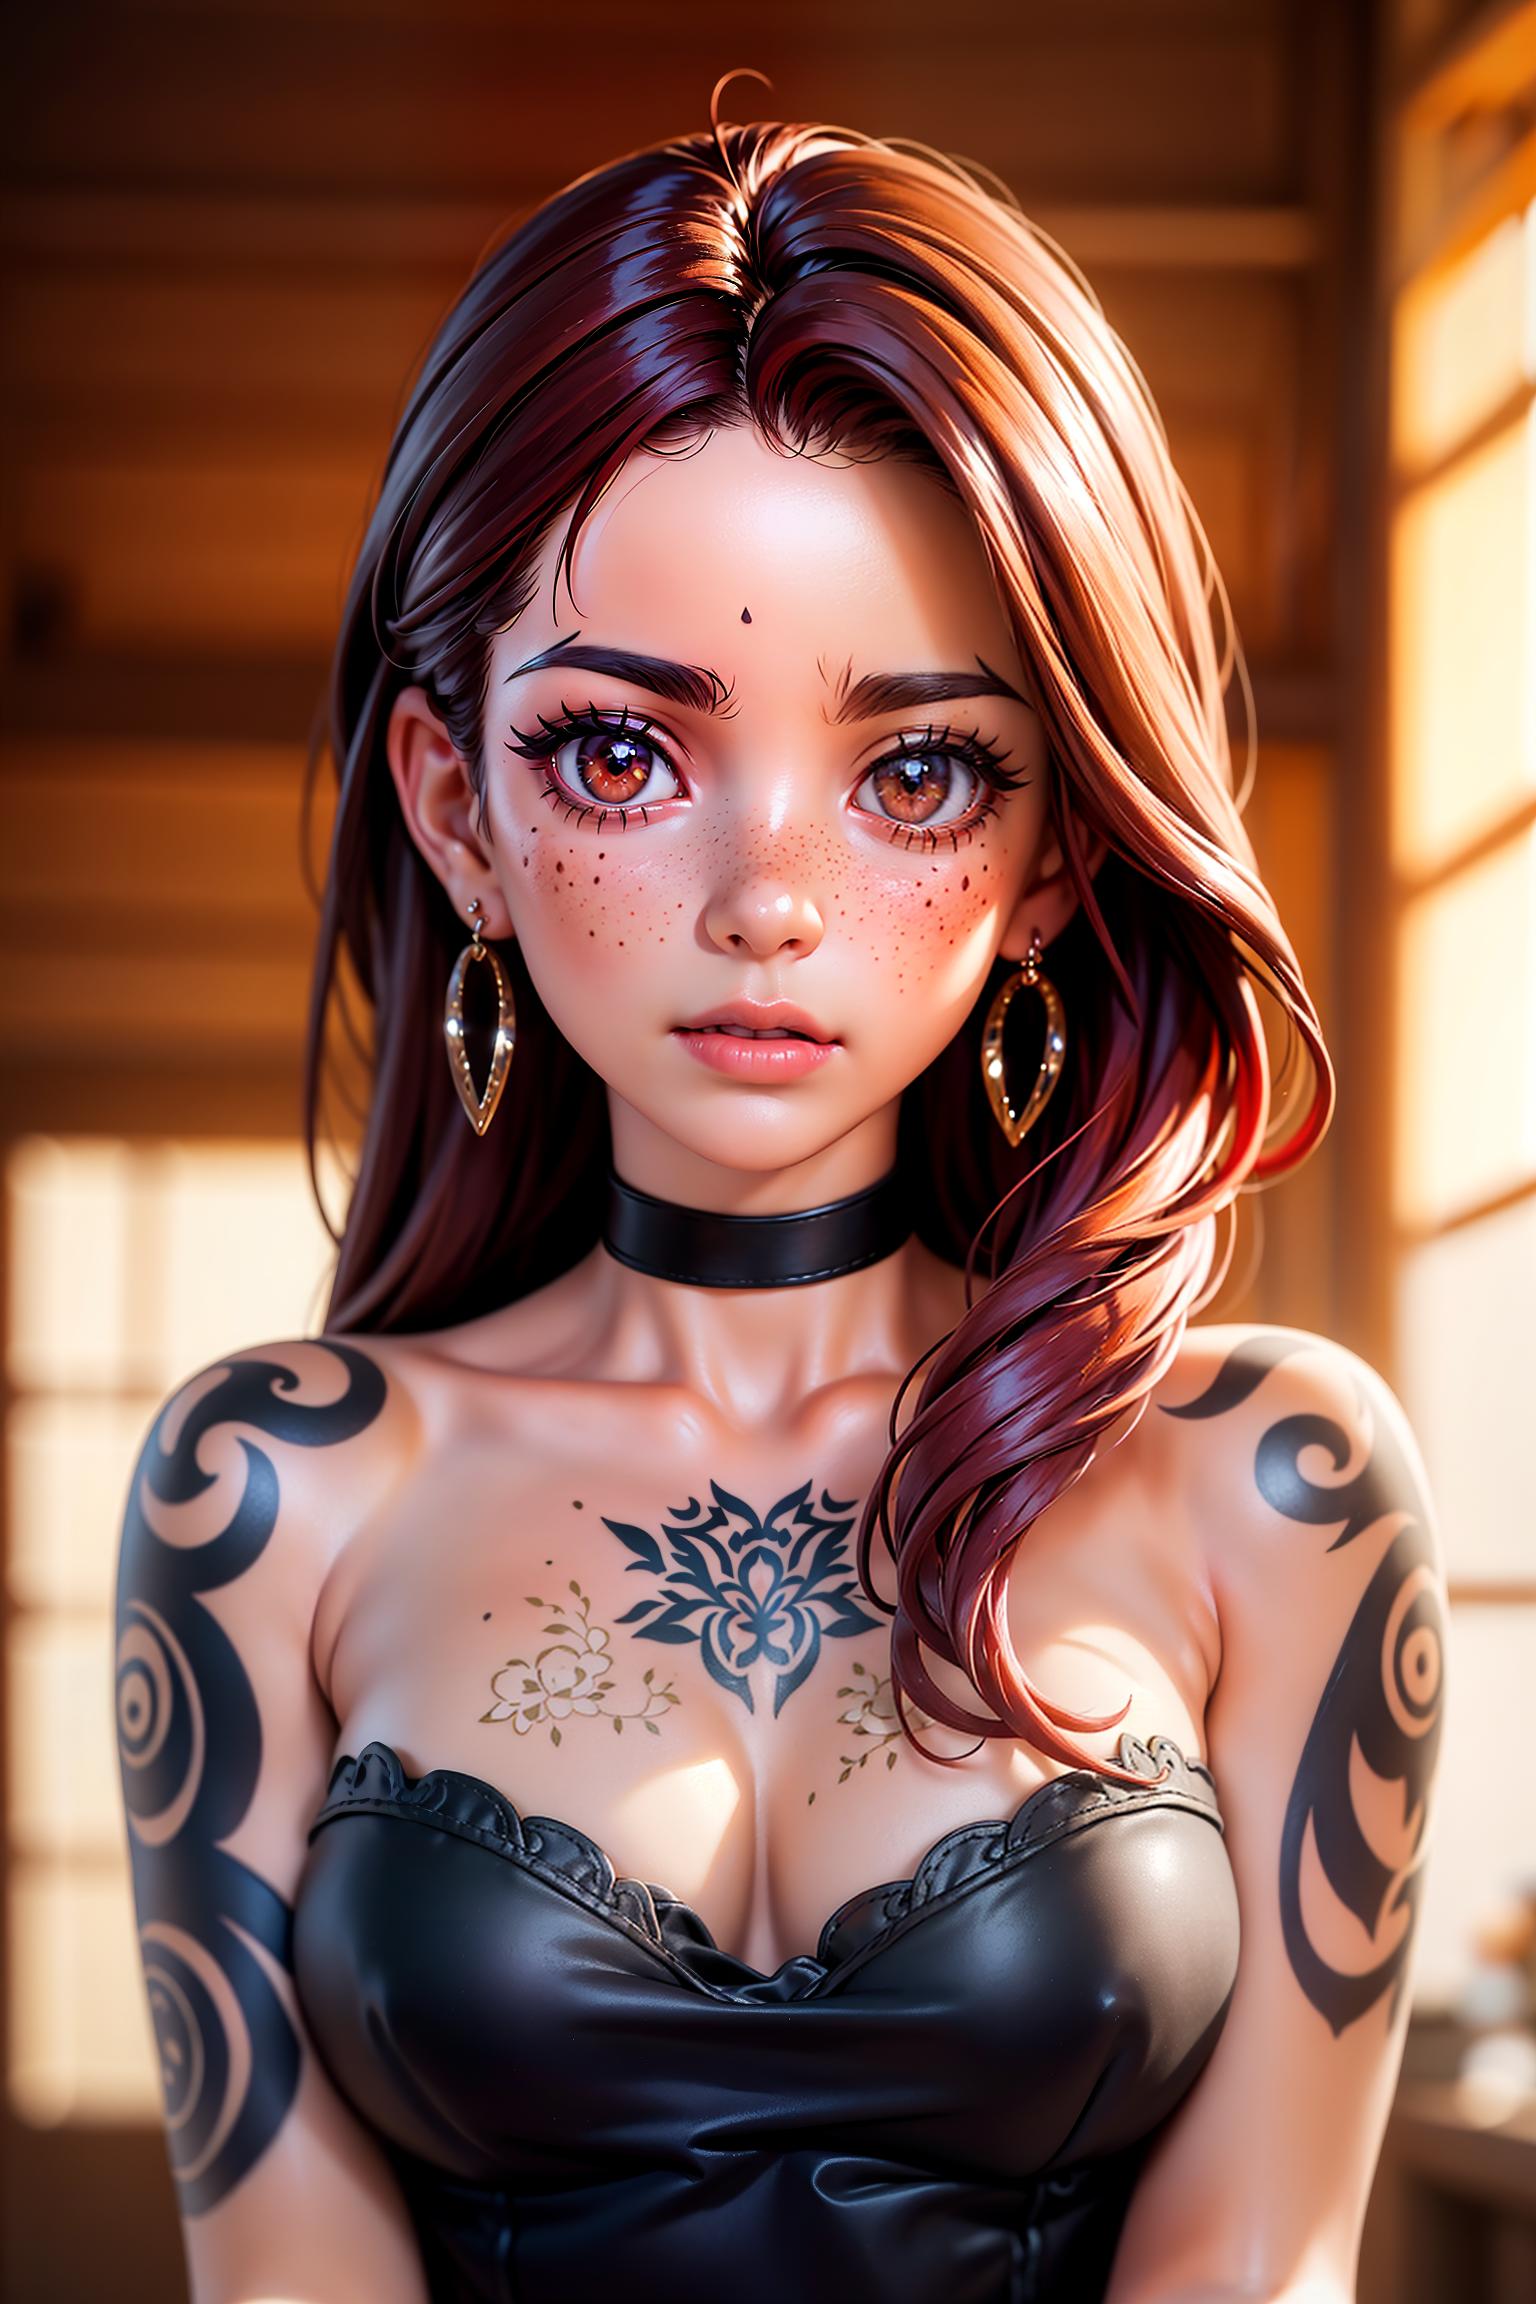  woman, old,backlighting,black choker,blurry background,blush,closed mouth,collarbone,earrings,forehead,freckles,hair over shoulder,jewelry,long hair,looking down,pointy nose,lips glossy,shadow,solo, eyebrows, eyelashes,upper body,red hair,ids,tattoos,tattoos on arms,black rose tattoos on neck,sun beams,warm light,cozy, (Masterpiece), (best quality), (intricate details, hyperdetailed:1.15), (detailed face), (realistic), (epic realistic), ((neutral colors)), (disney pixar style)